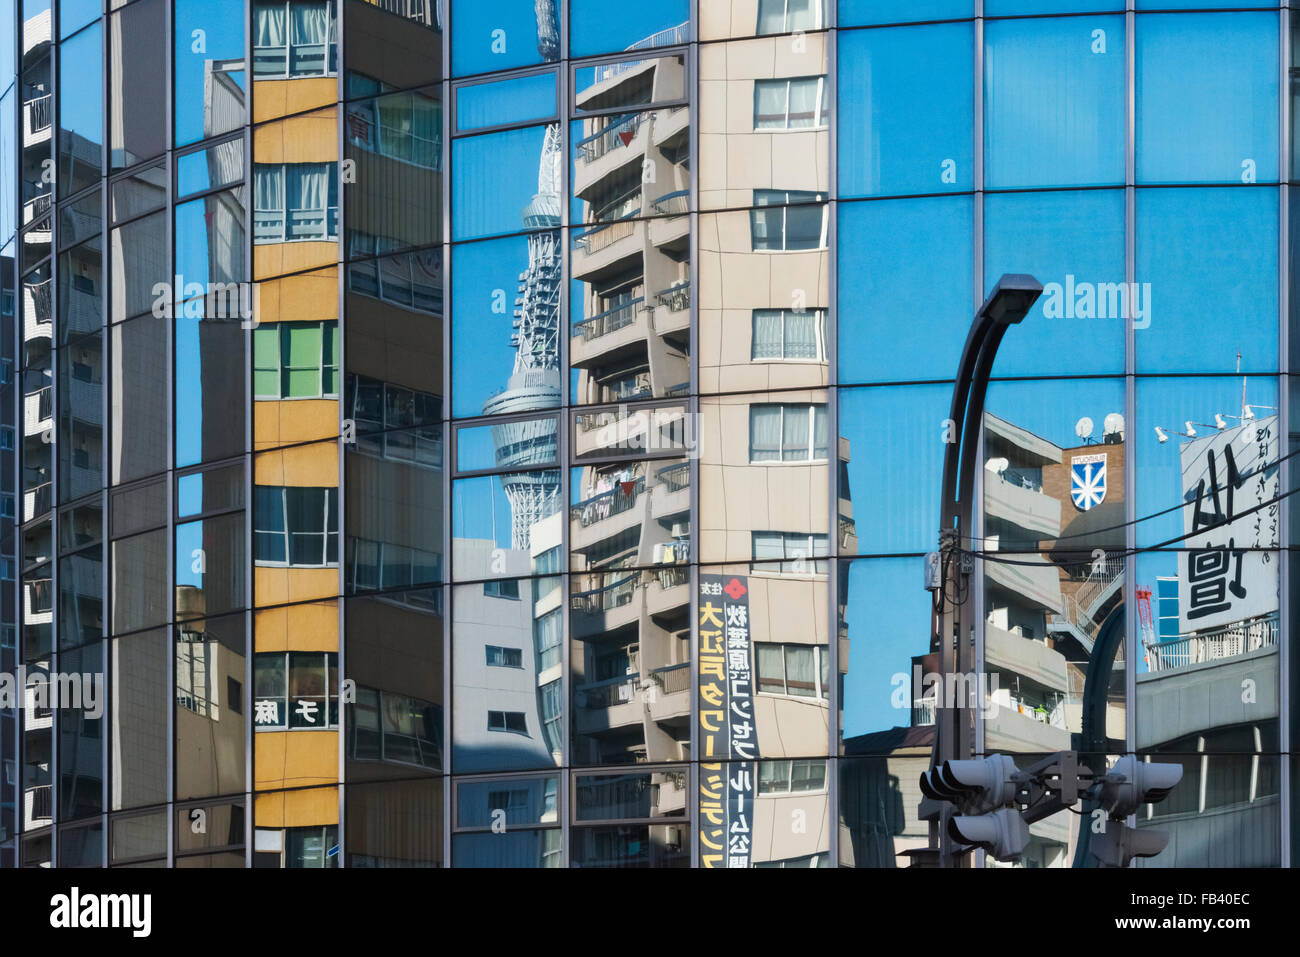 Reflection of buildings on the glass exterior of a building, Tokyo, Japan Stock Photo